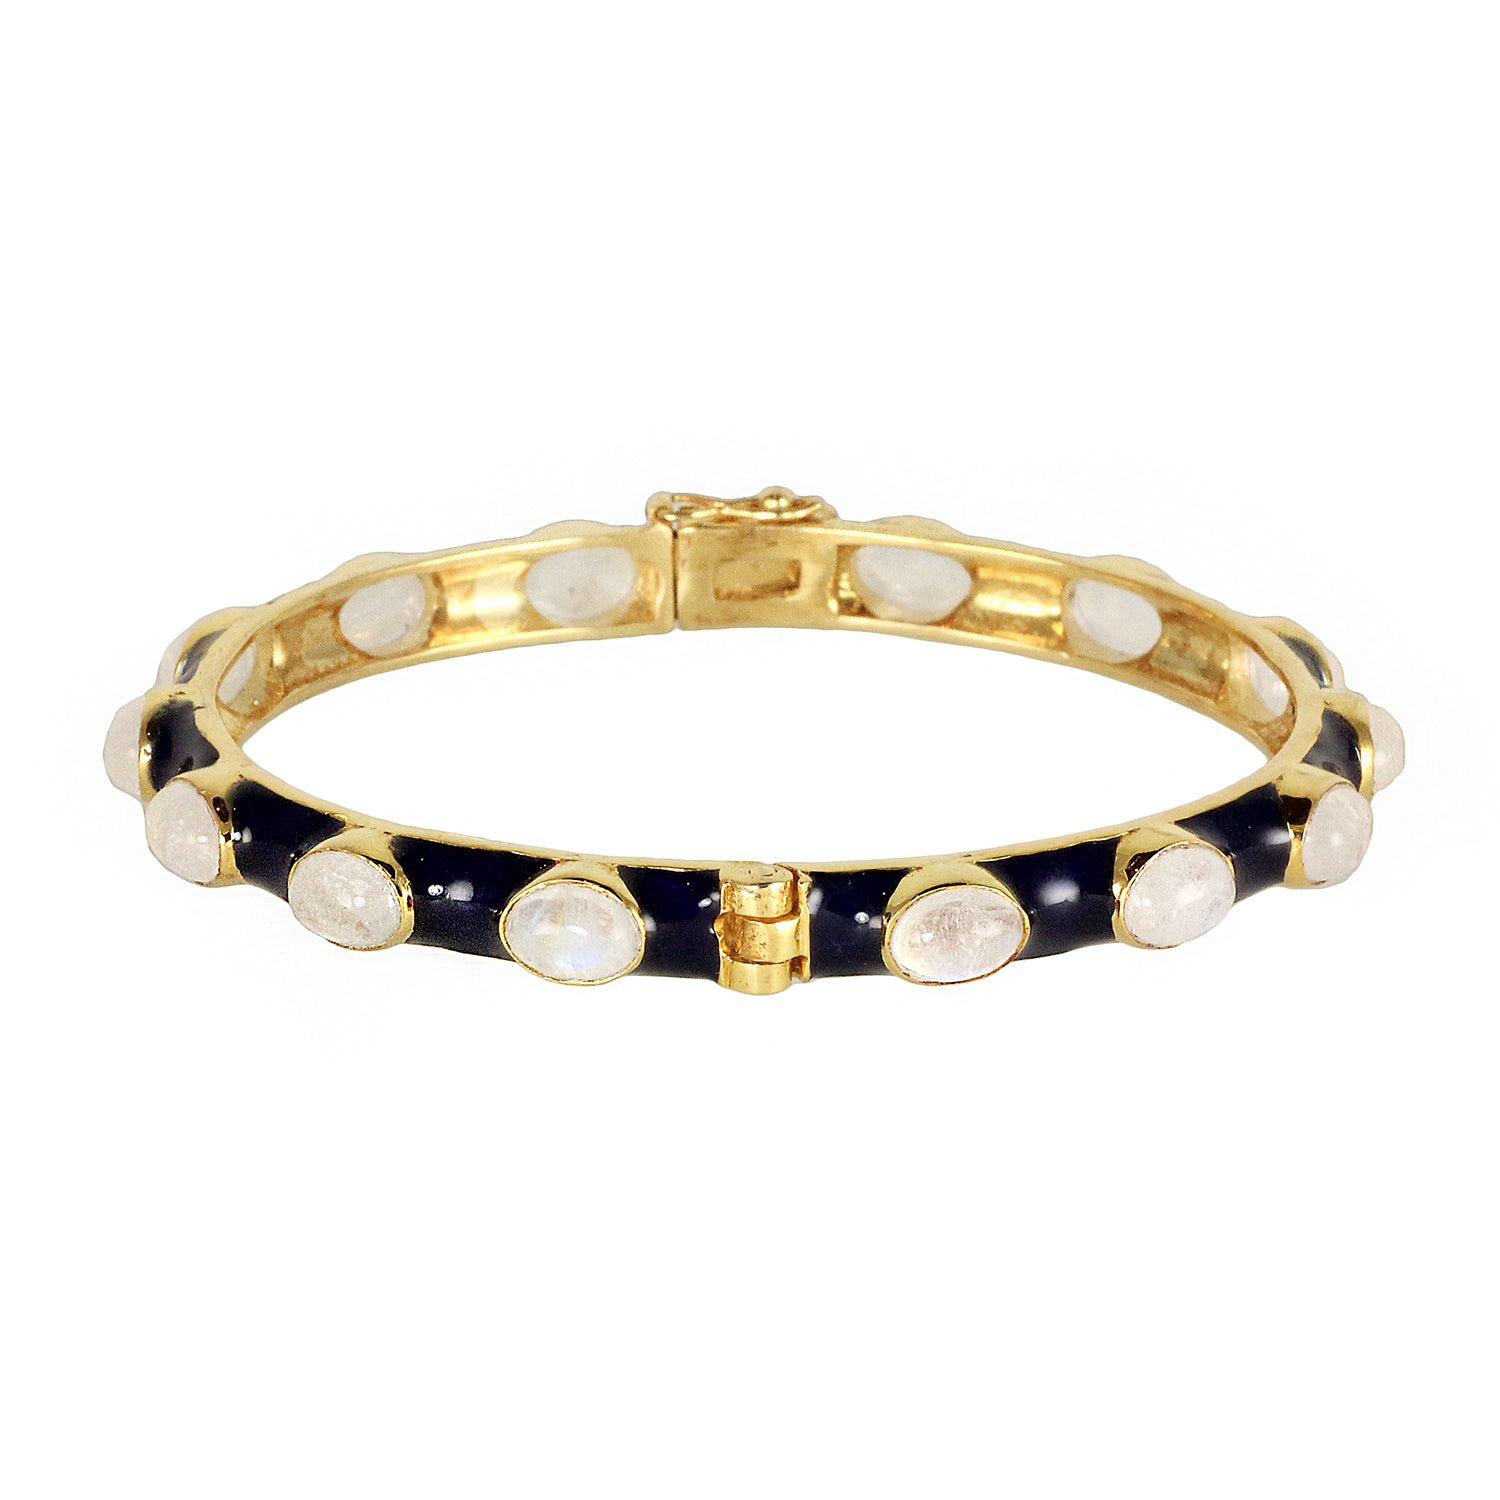 Blue enamel silver gold plated bracelet bangle with moonstones, made in Indian